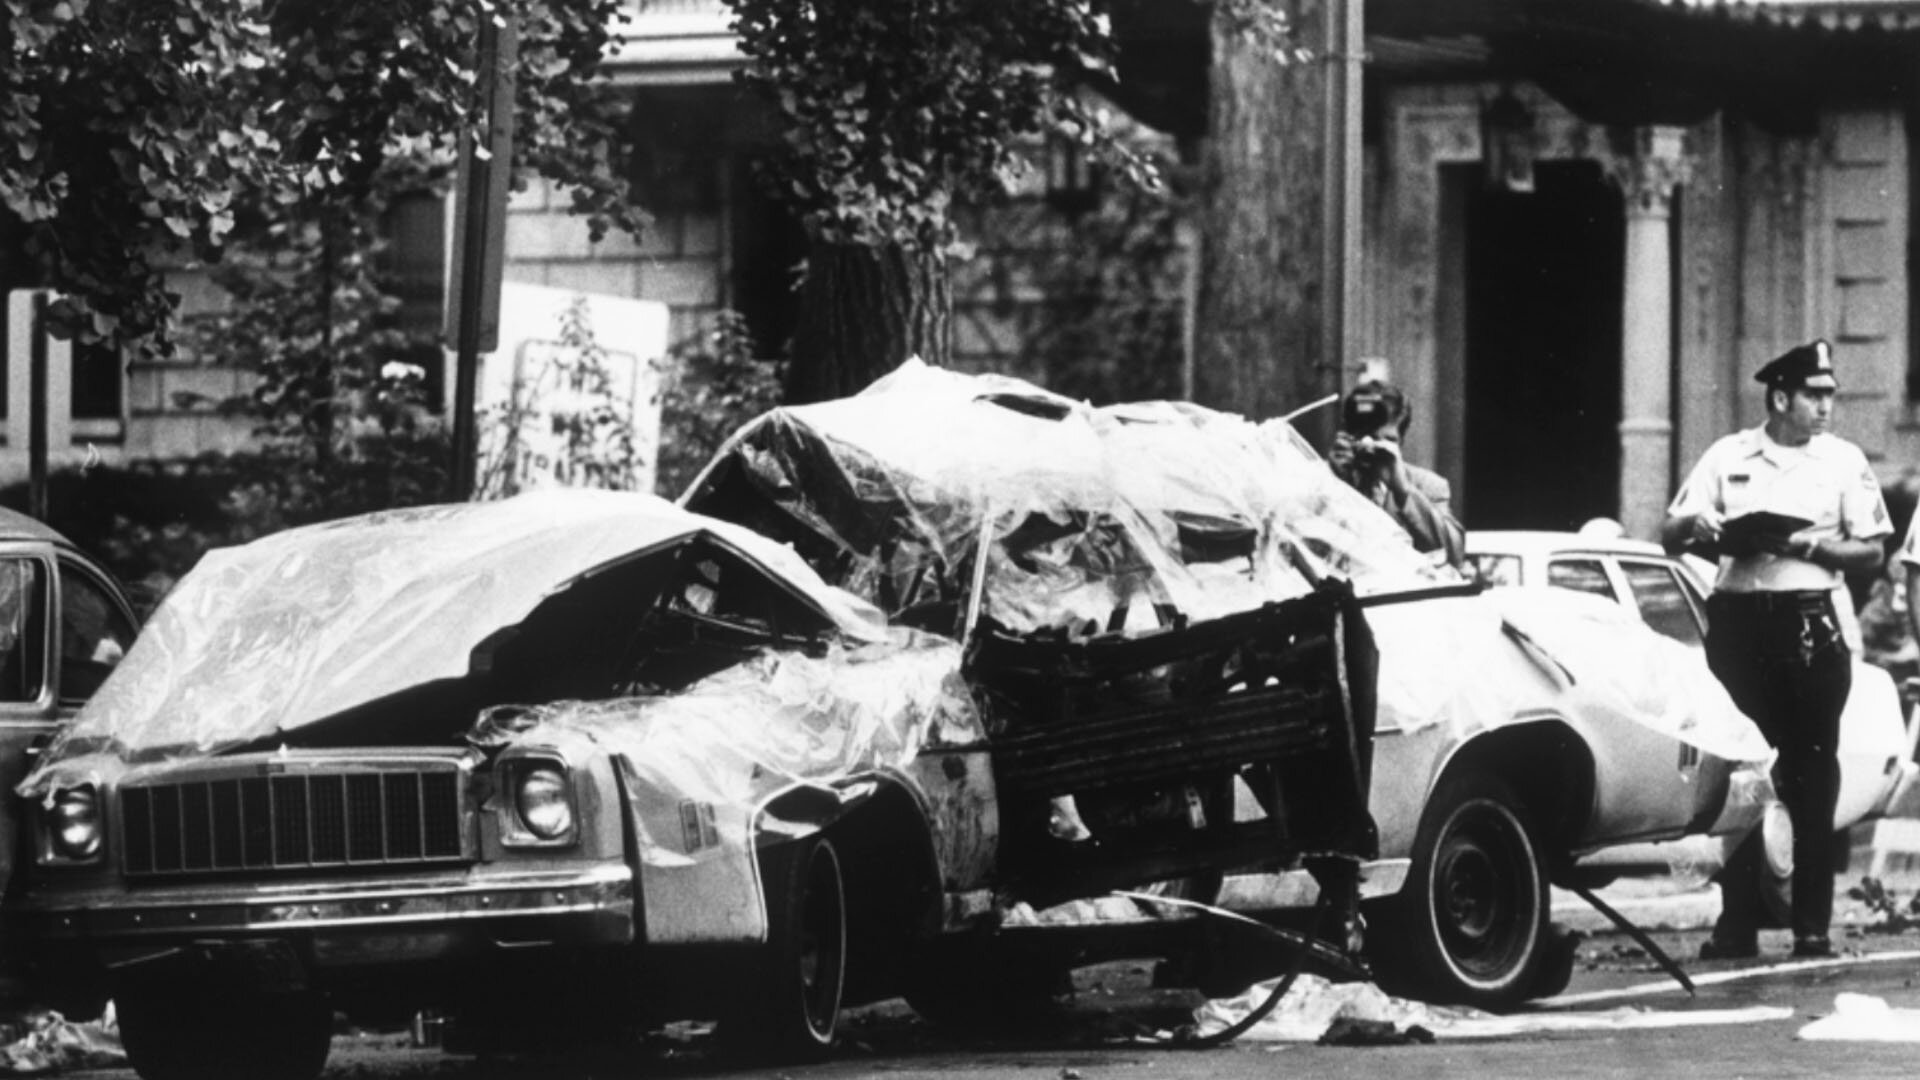 The 1976 assassination of former Chilean ambassador and dissident Orlando Letelier along Embassy Row shocked the nation (photo Washington Post).